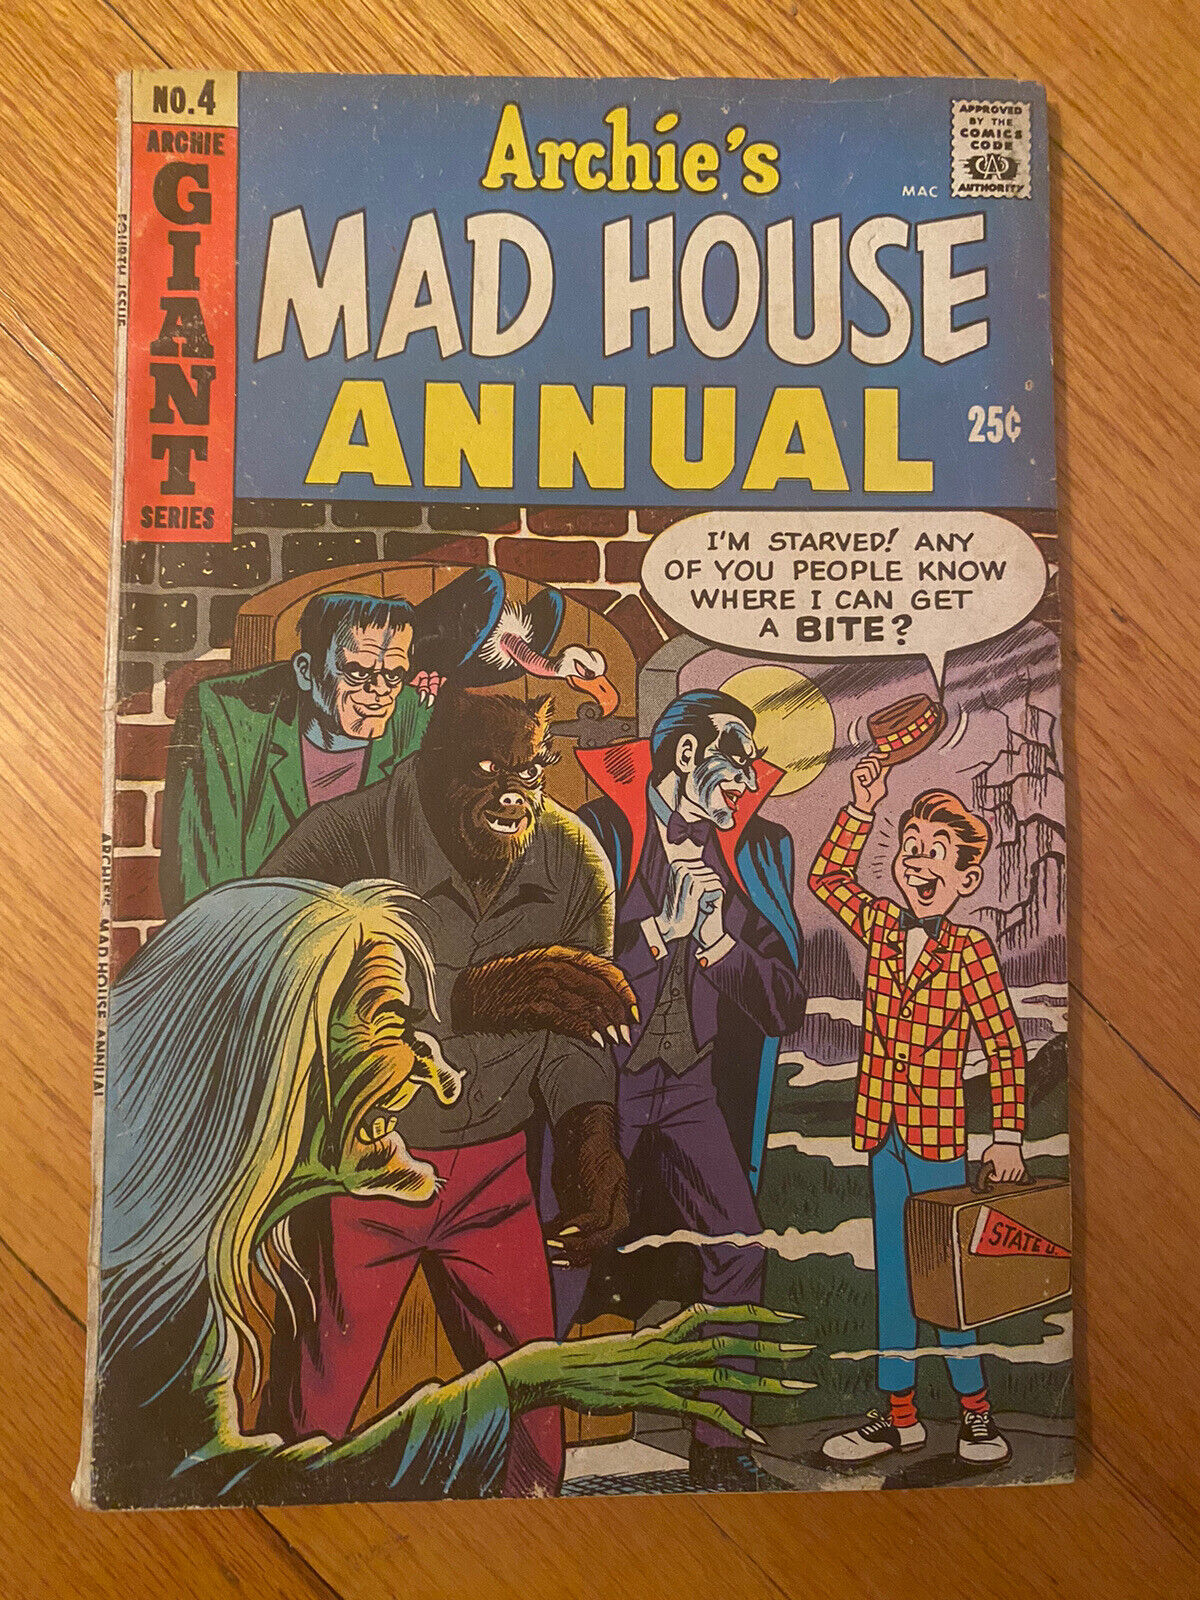 ARCHIE SERIES ARCHIE’S MADHOUSE ANNUAL # 4 1966 MONSTERS VG+ COMIC 